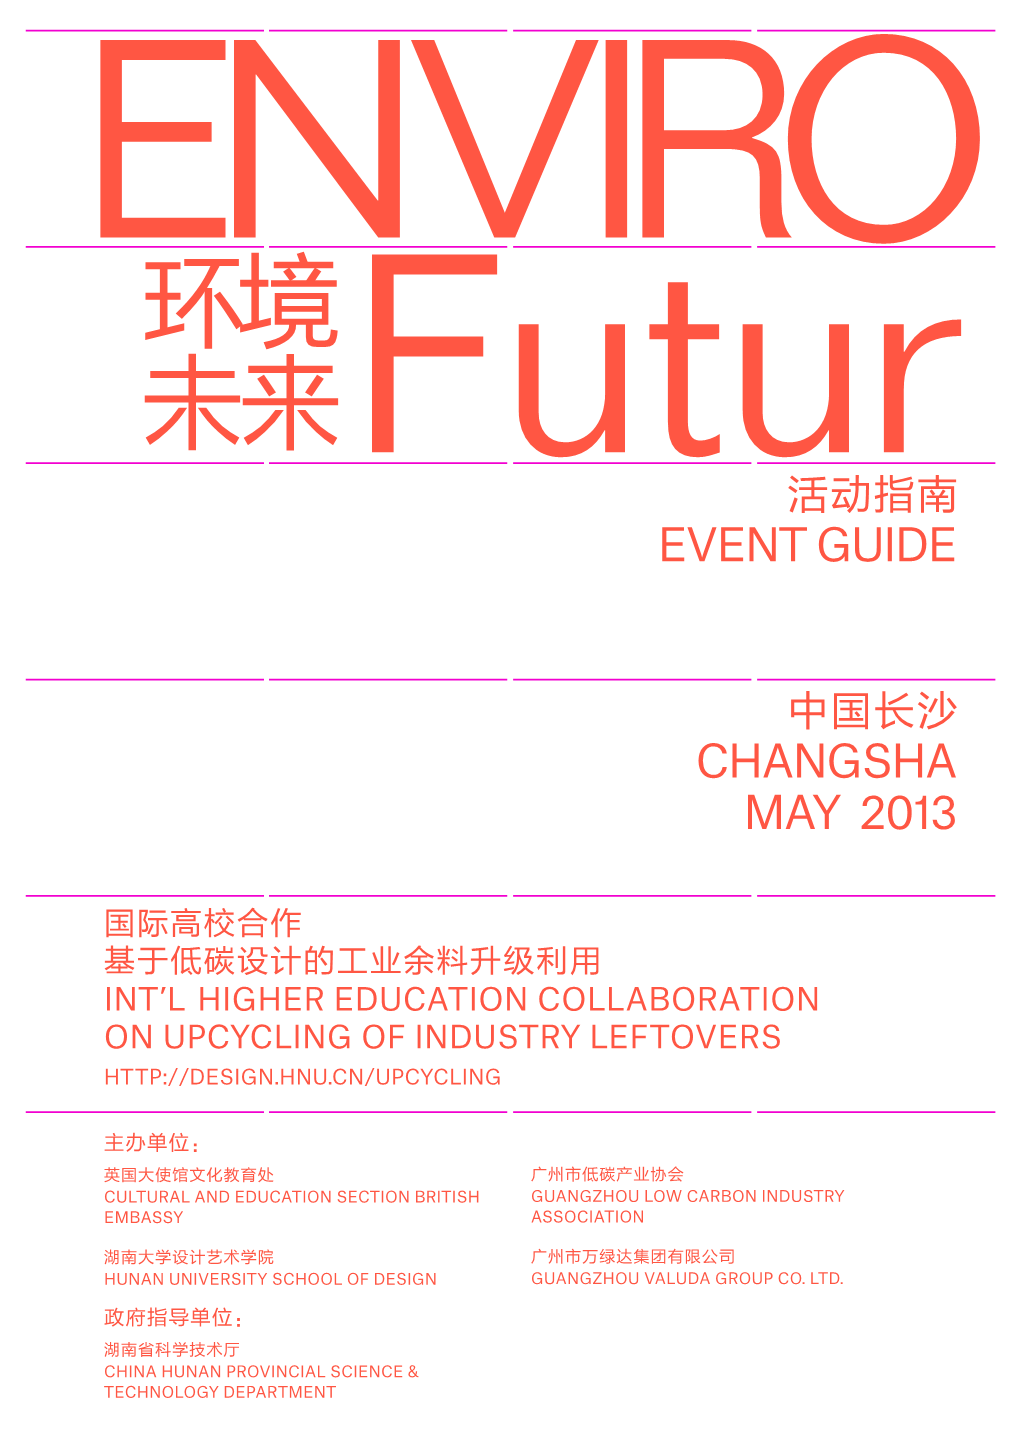 Event Guide Changsha May 2013